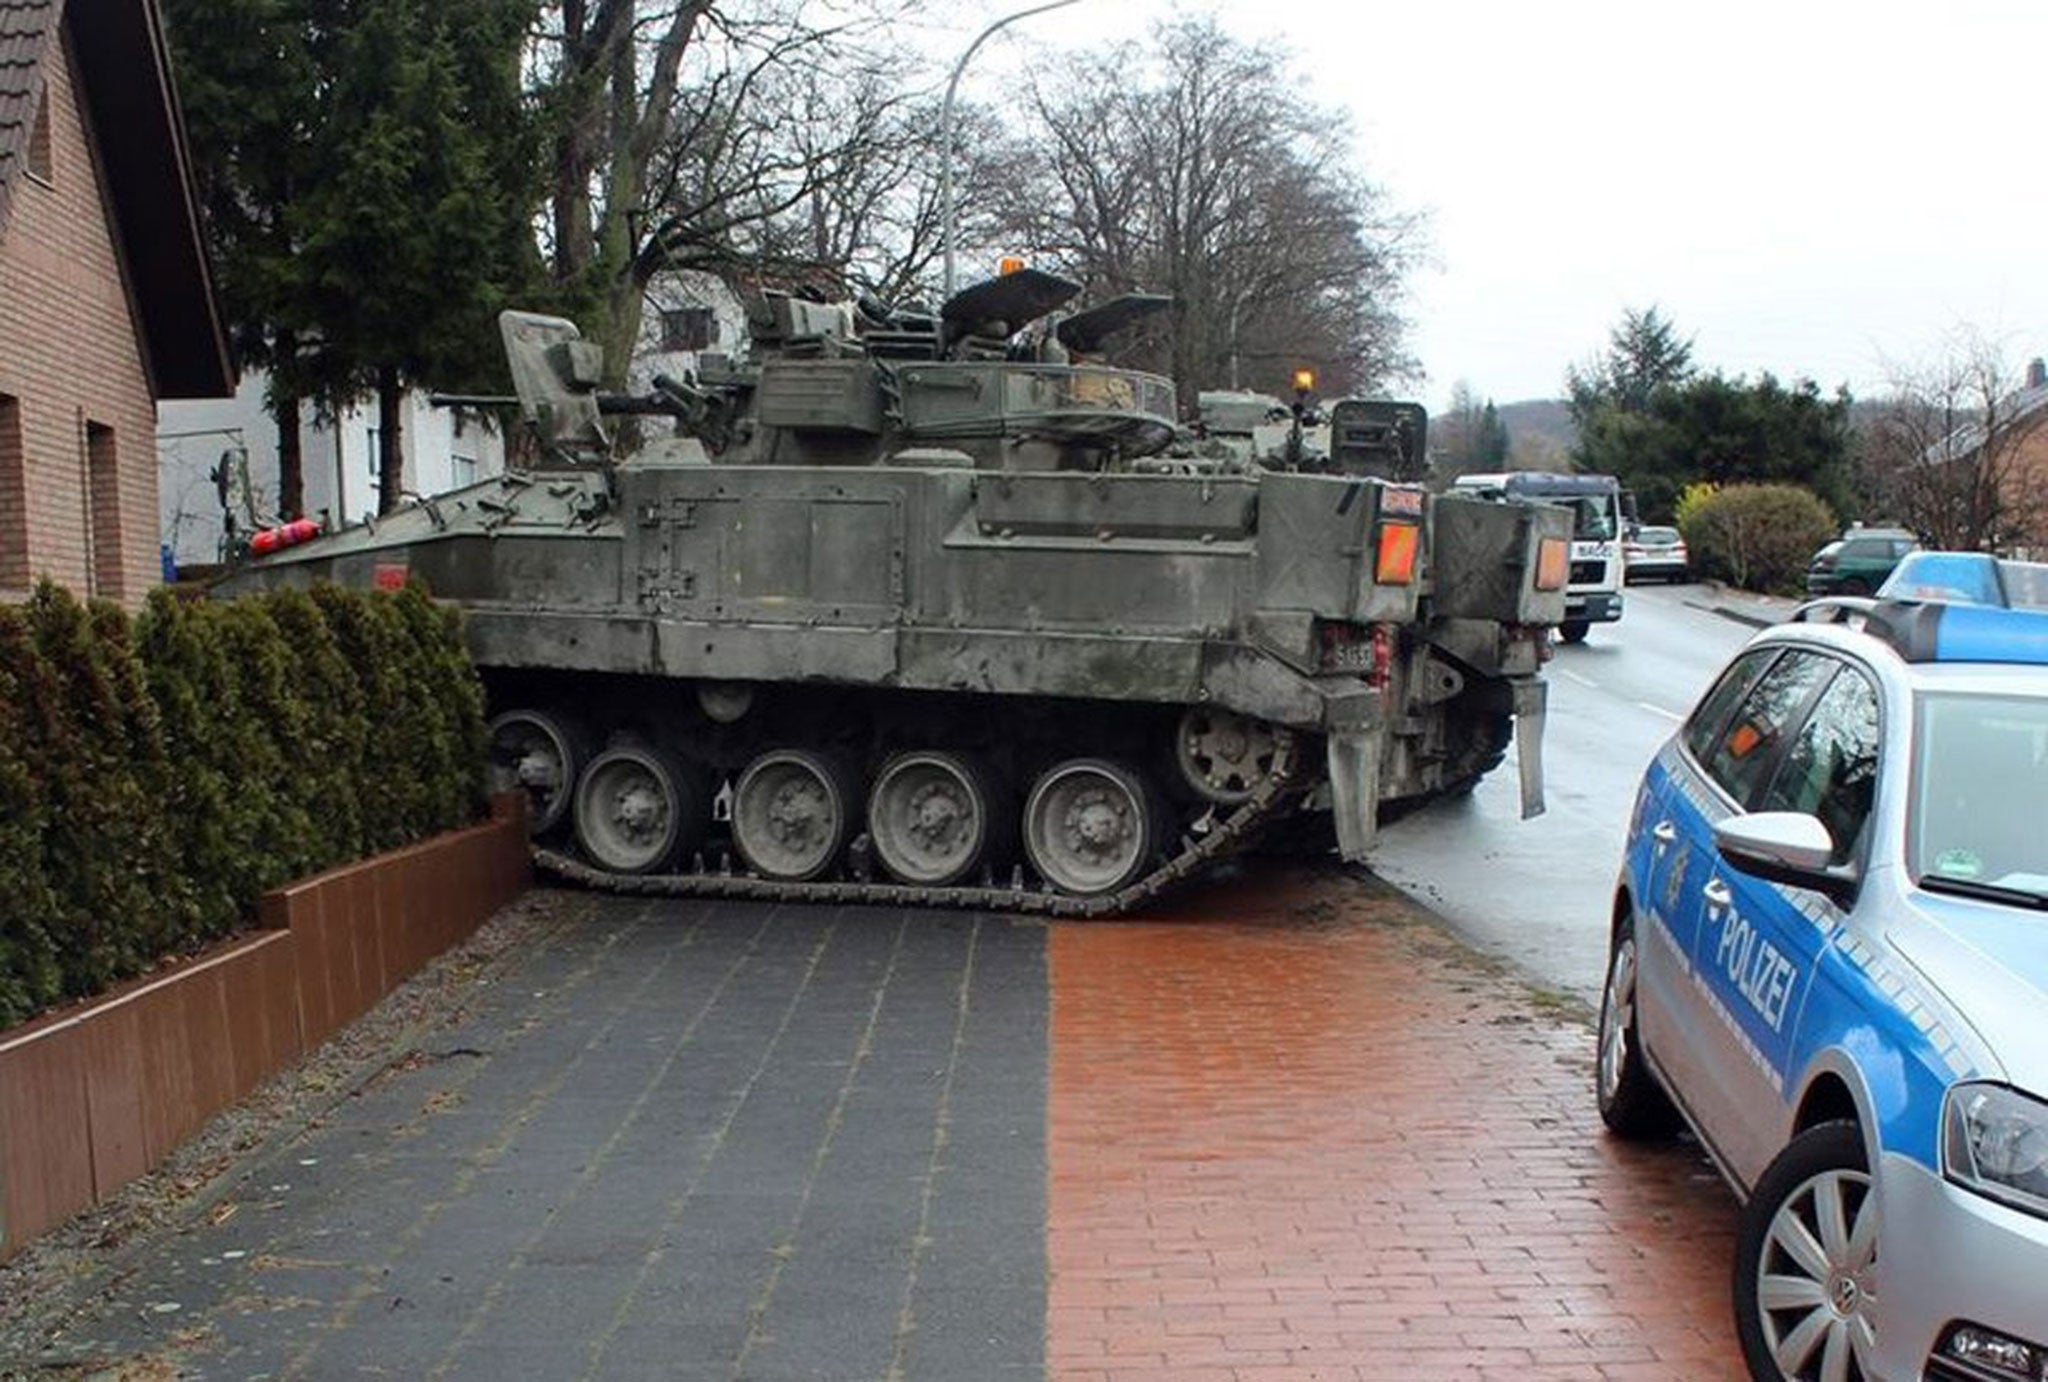 A tank rolls into a yard in Paderborn, Germany. A technical malfunction with a drive chain reportedly led the British tank to deviate from the street and into a yard